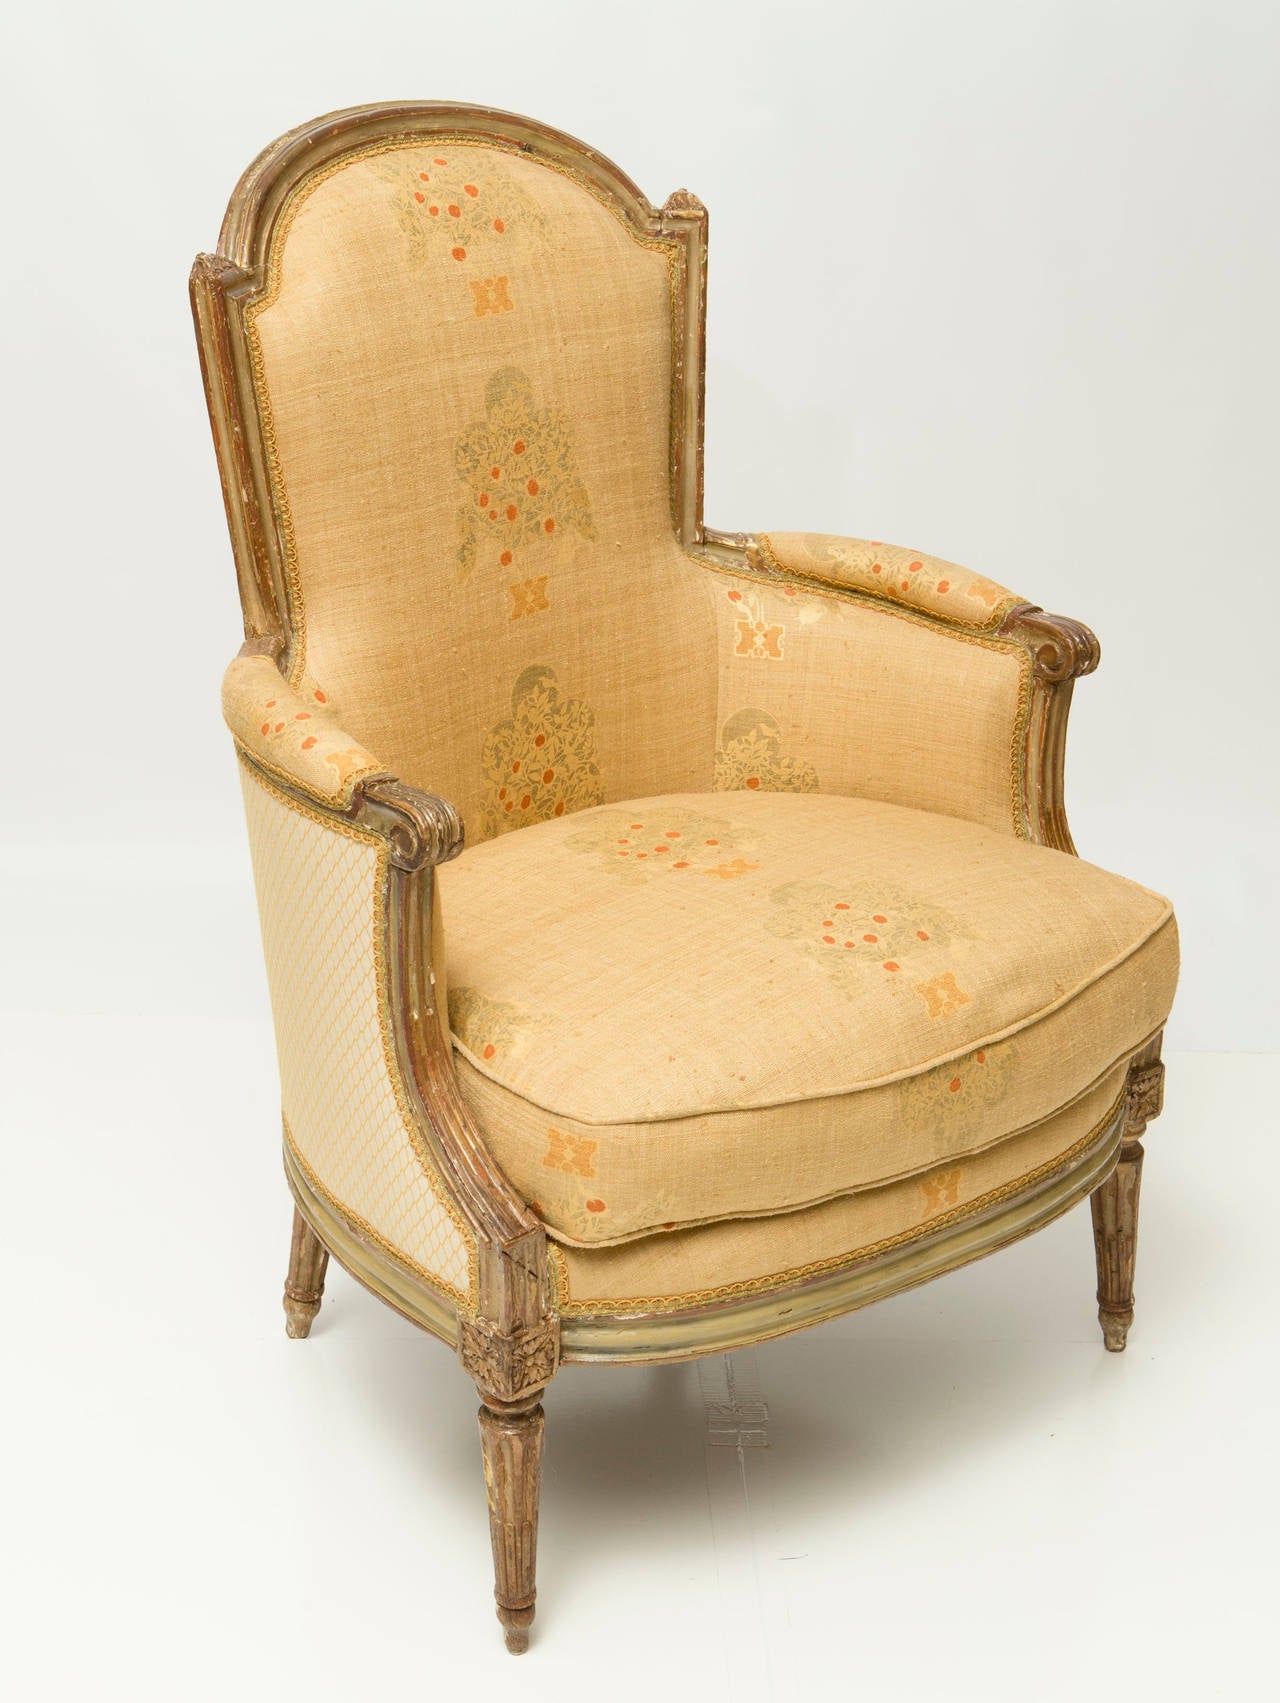 Decorative French Bergere Chair with yellow floral upholstery and painted carved wood legs. Contrasting fabric on the back and sides.